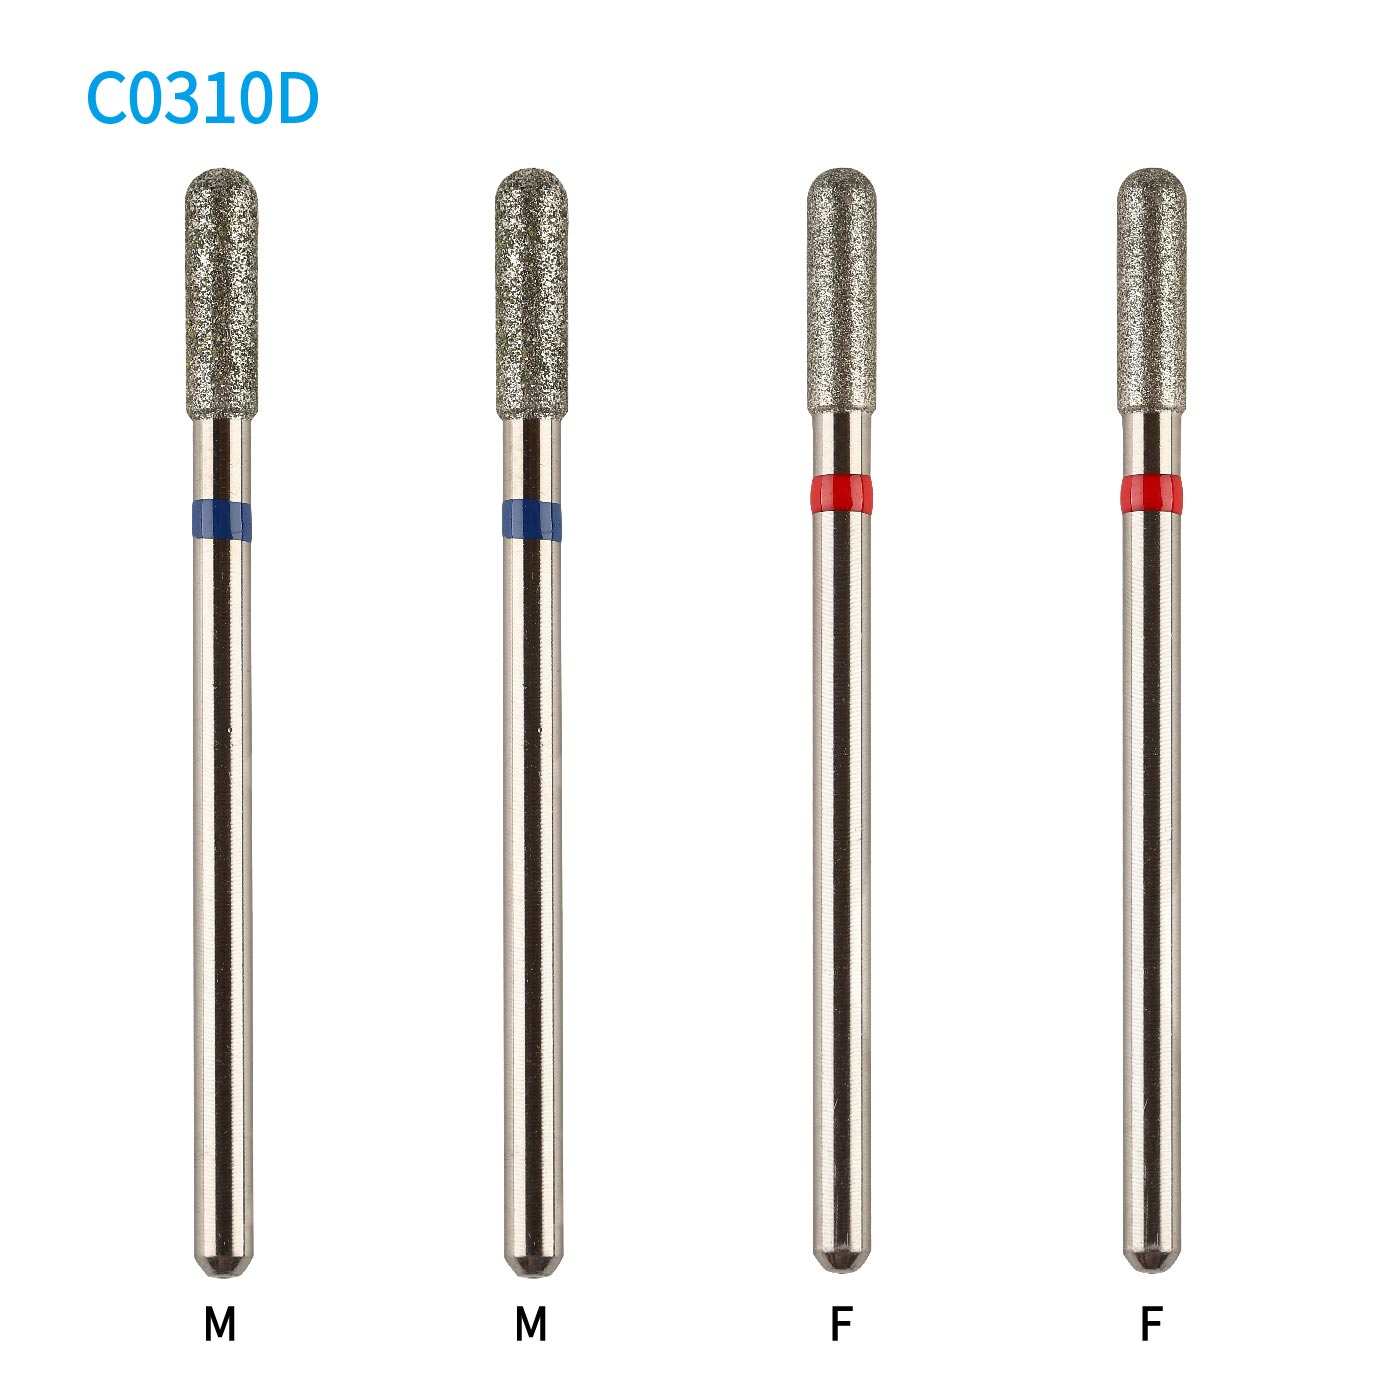 Cylinder Round Top Diamond Nail Drill Bit C0310D Featured Image